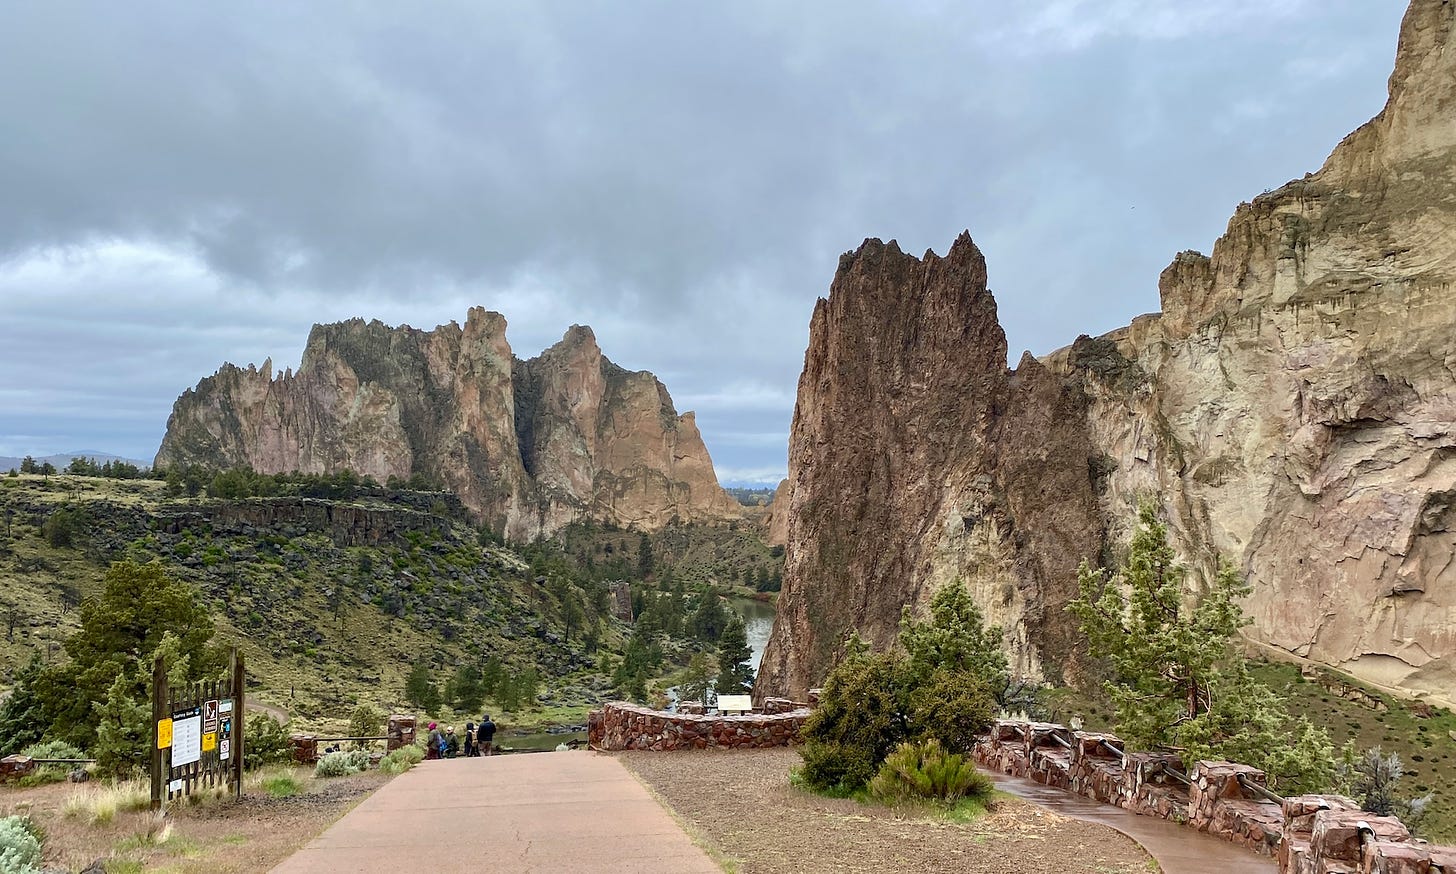 A photo of Smith Rock in Oregon. The sky is heavy with dramatic gray clouds and the steep cliffs of Smith Rock stand sharply against the sky.